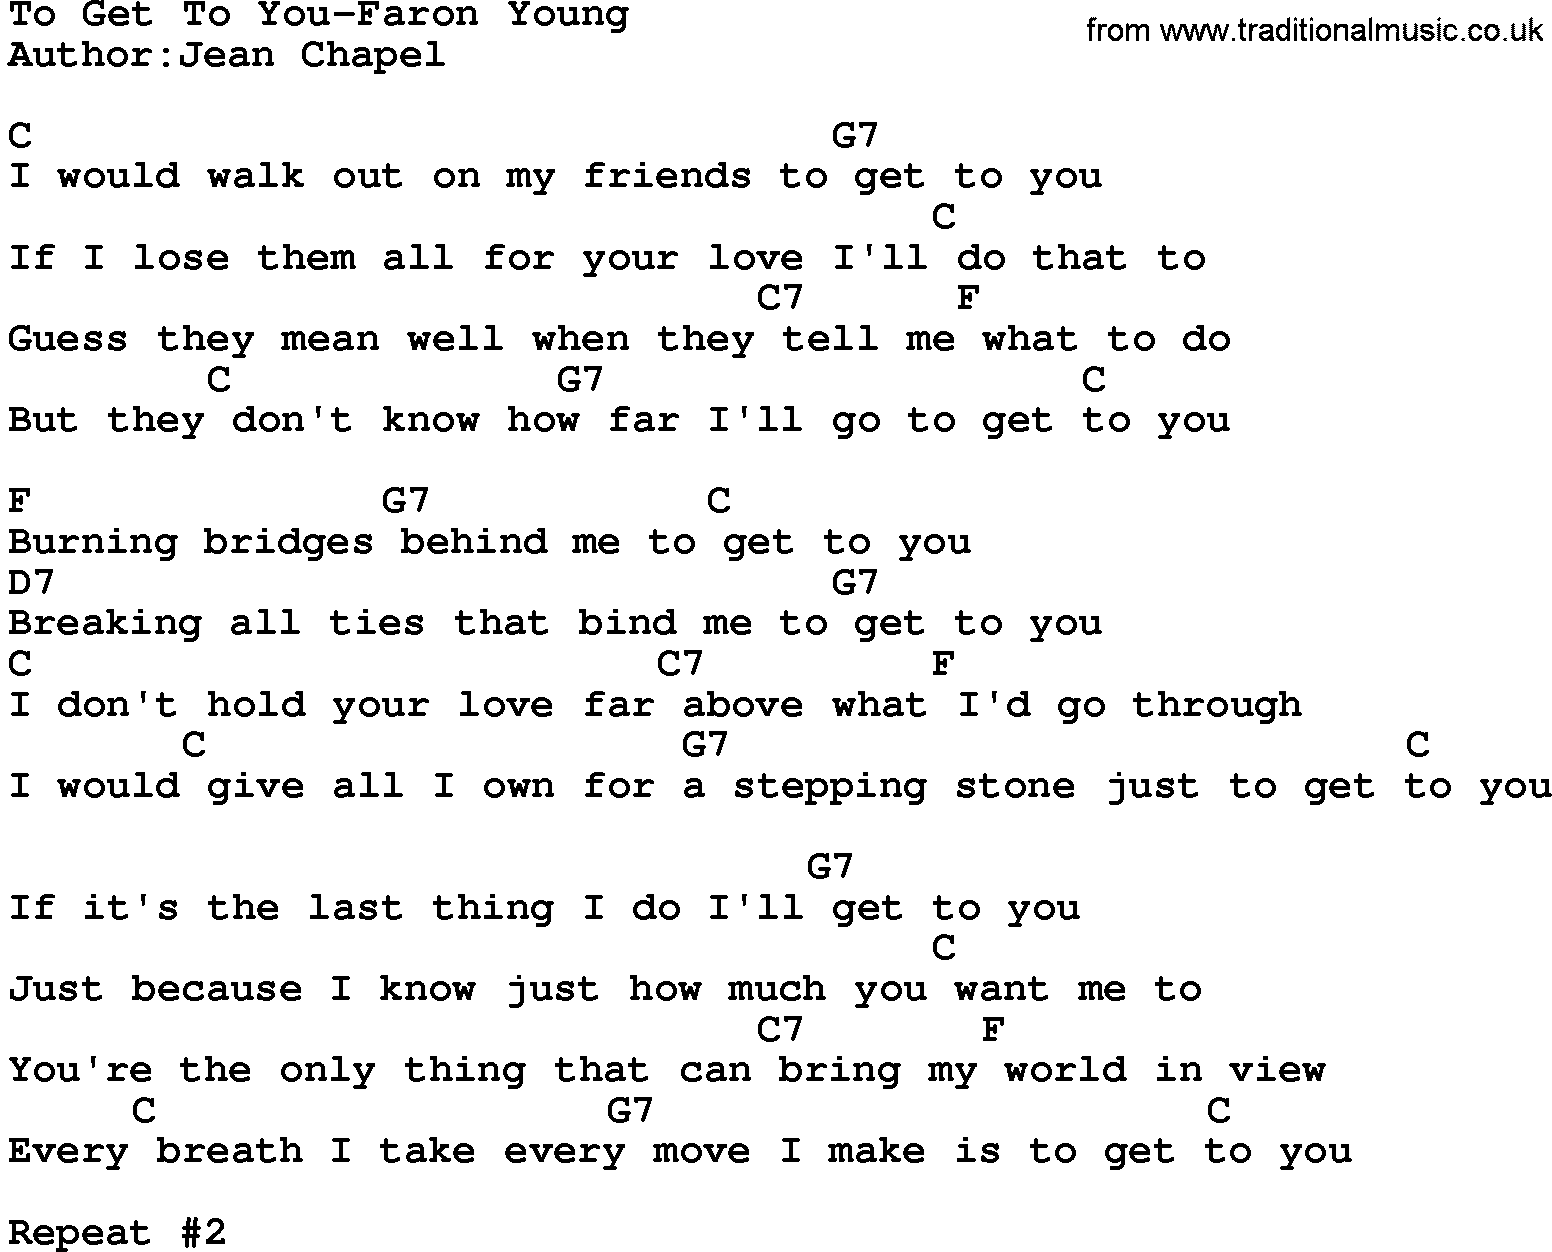 Country music song: To Get To You-Faron Young  lyrics and chords